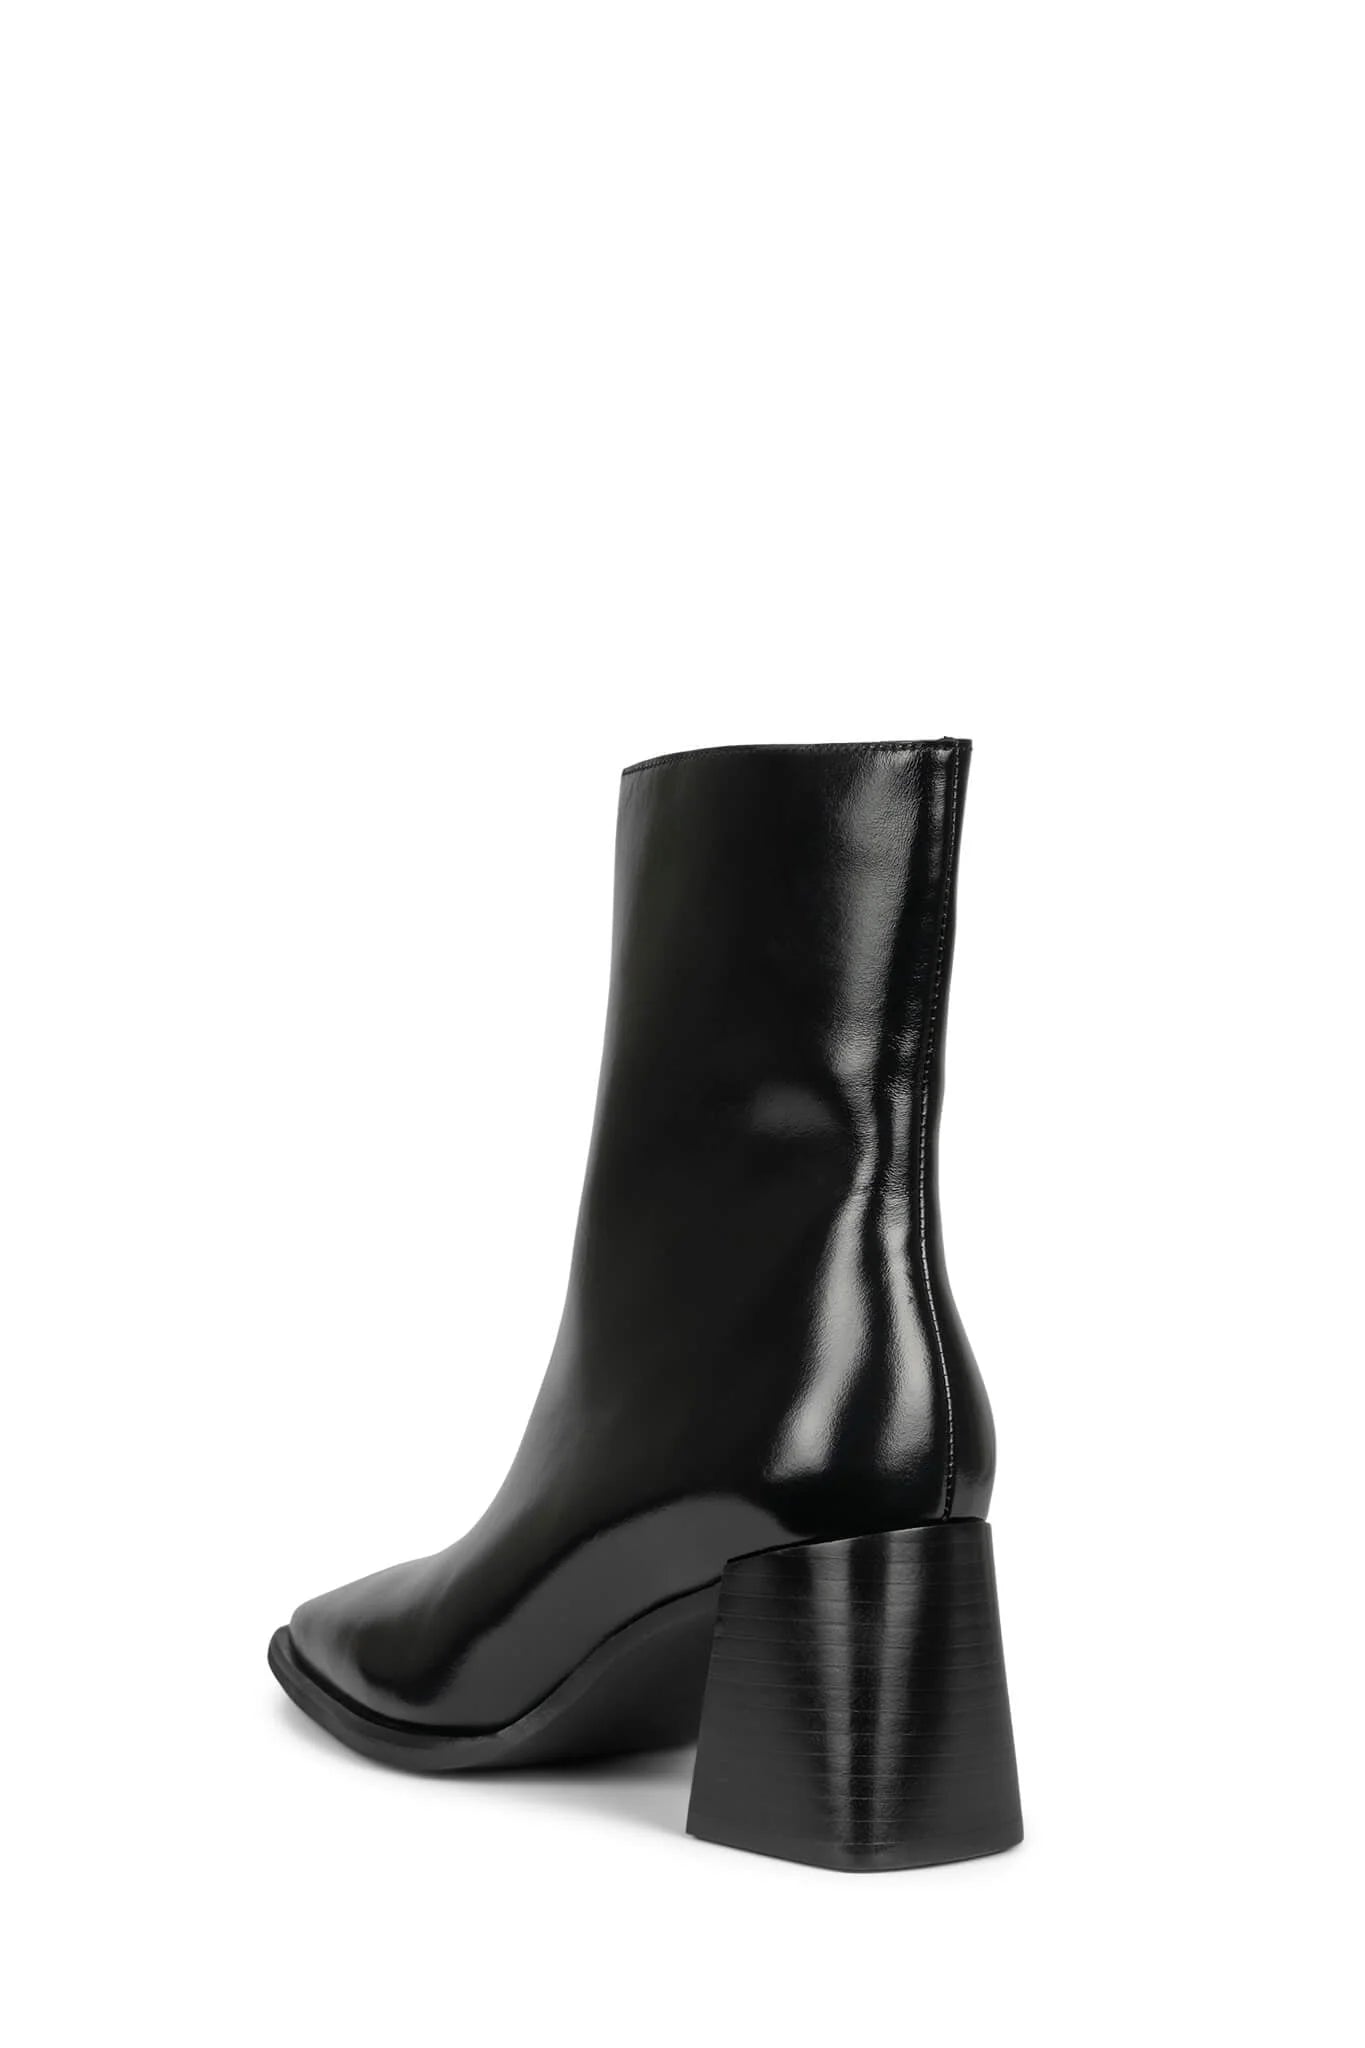 JEFFREY CAMPBELL SHERPAL - MH ANKLE BOOT